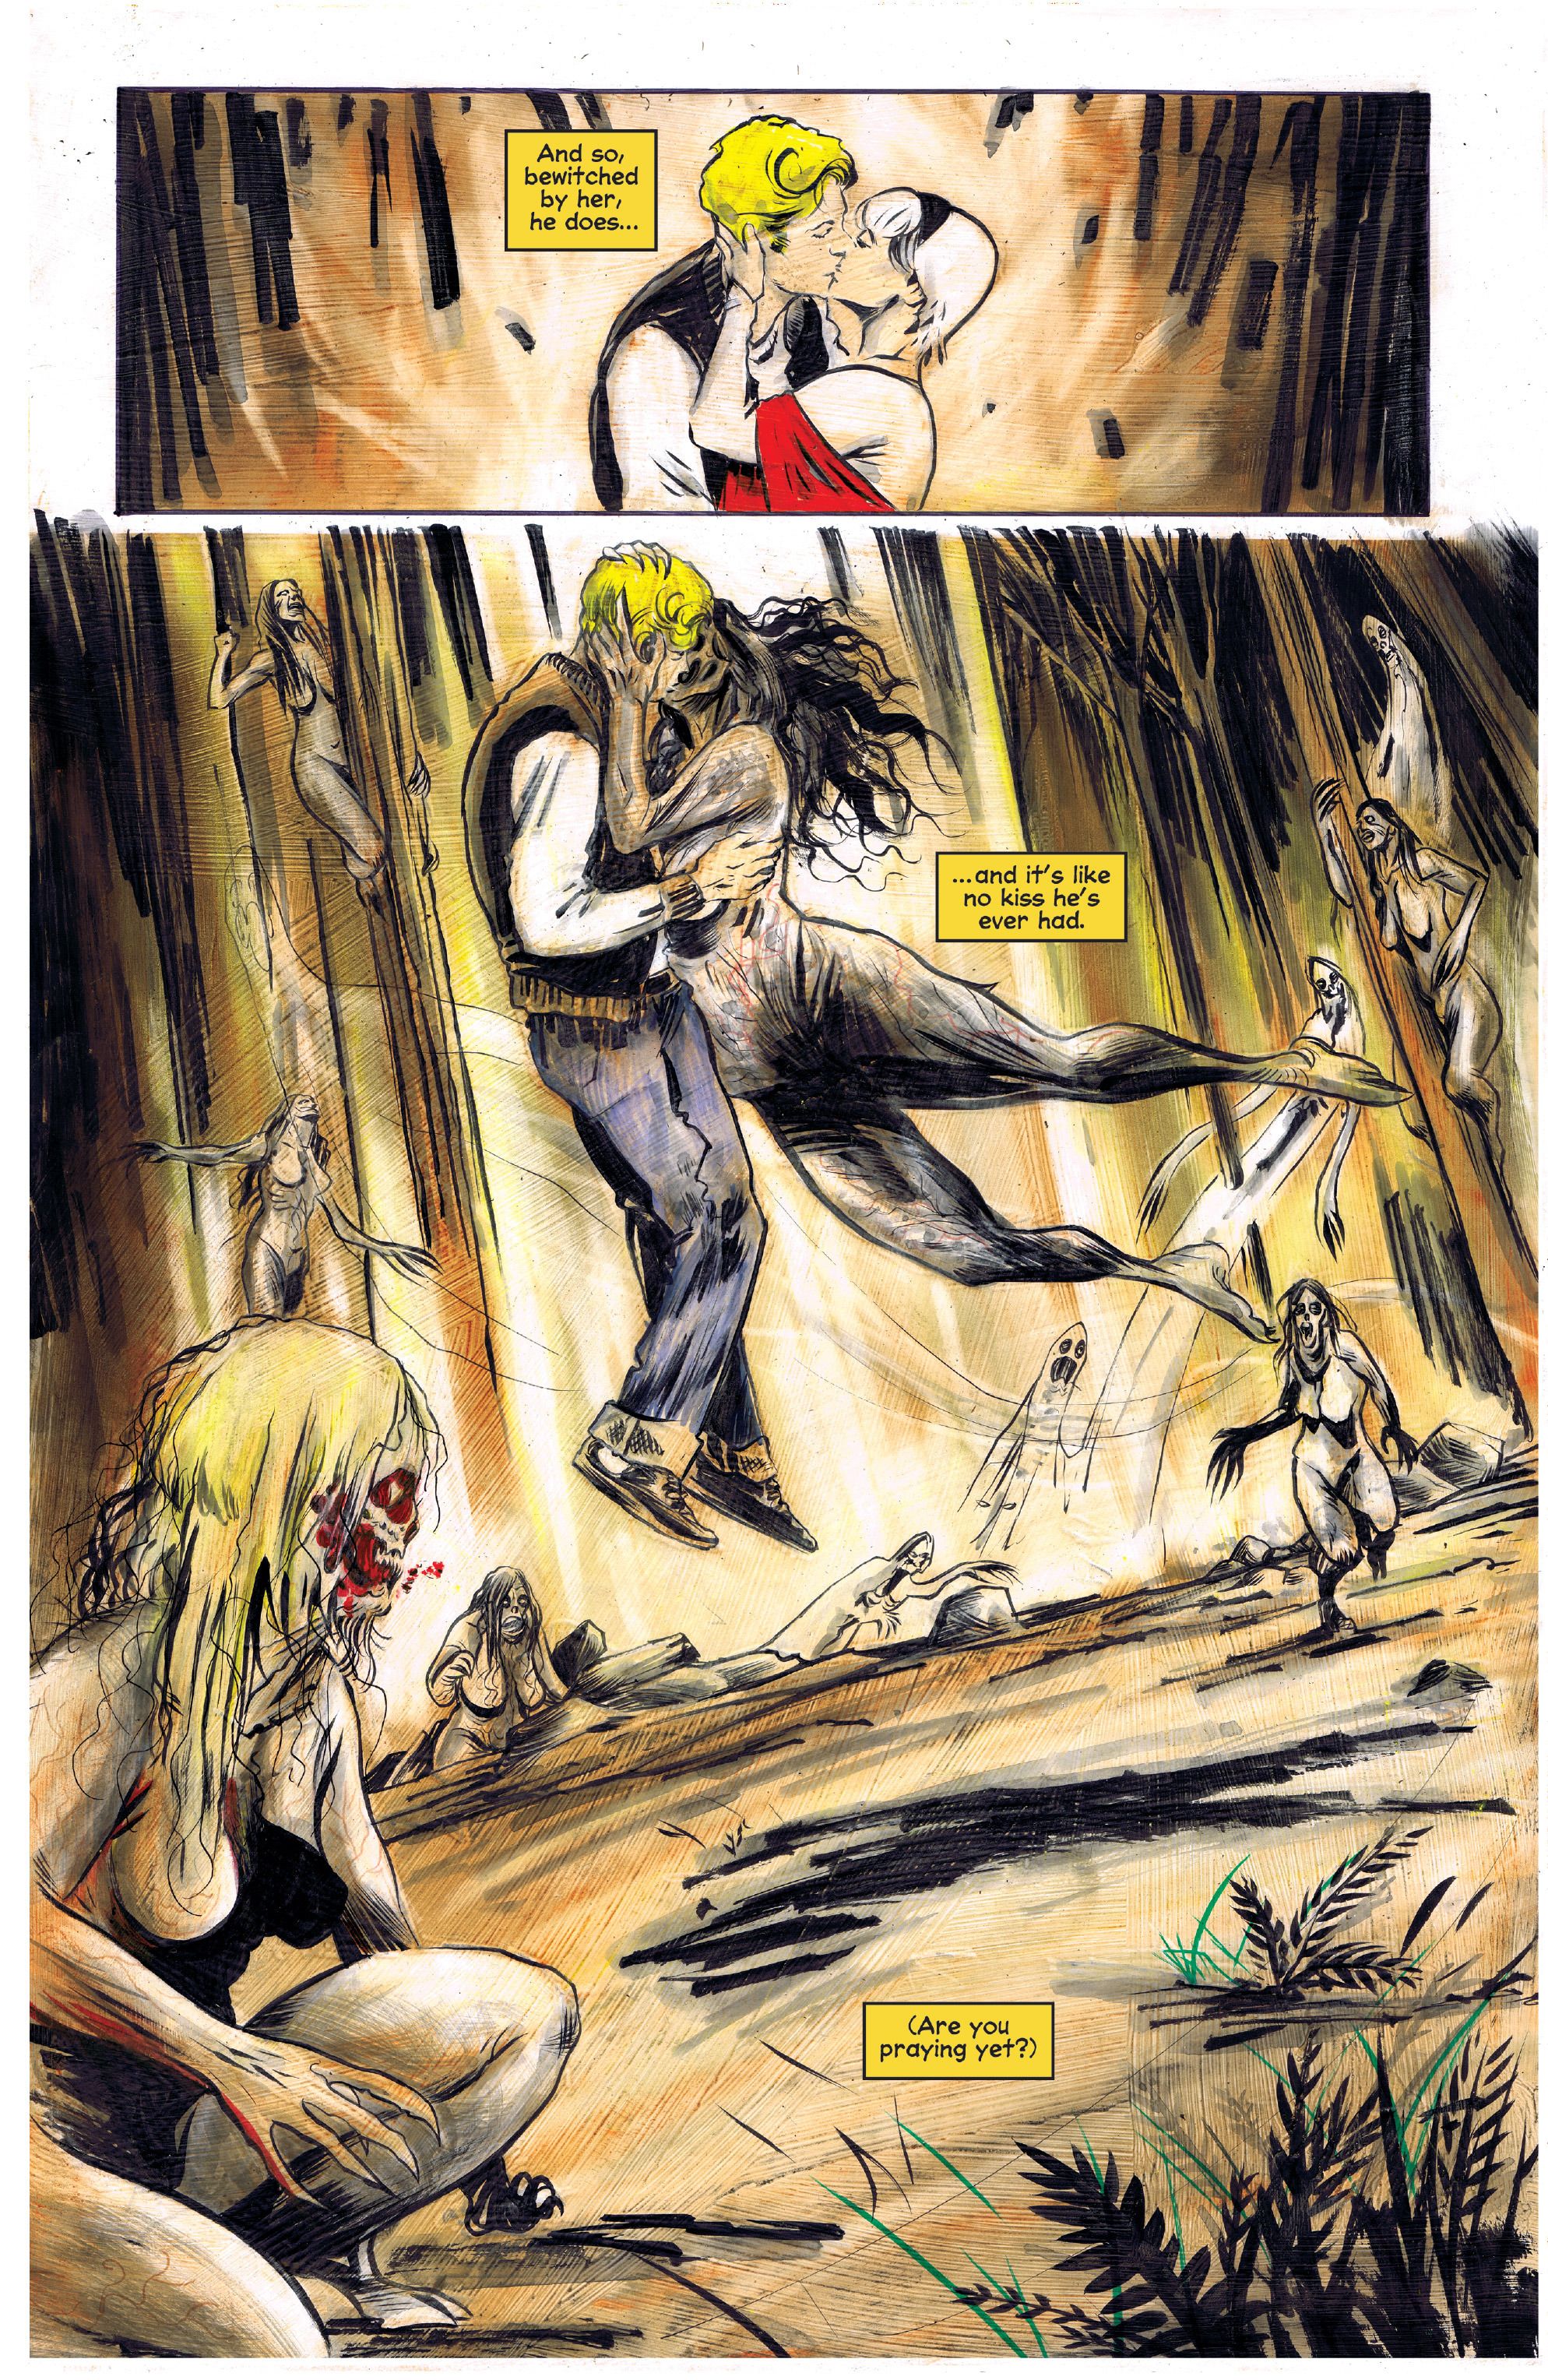 Harvey Kinkle is attacked by Sabrina's coven in Chilling Adventures of Sabrina #4